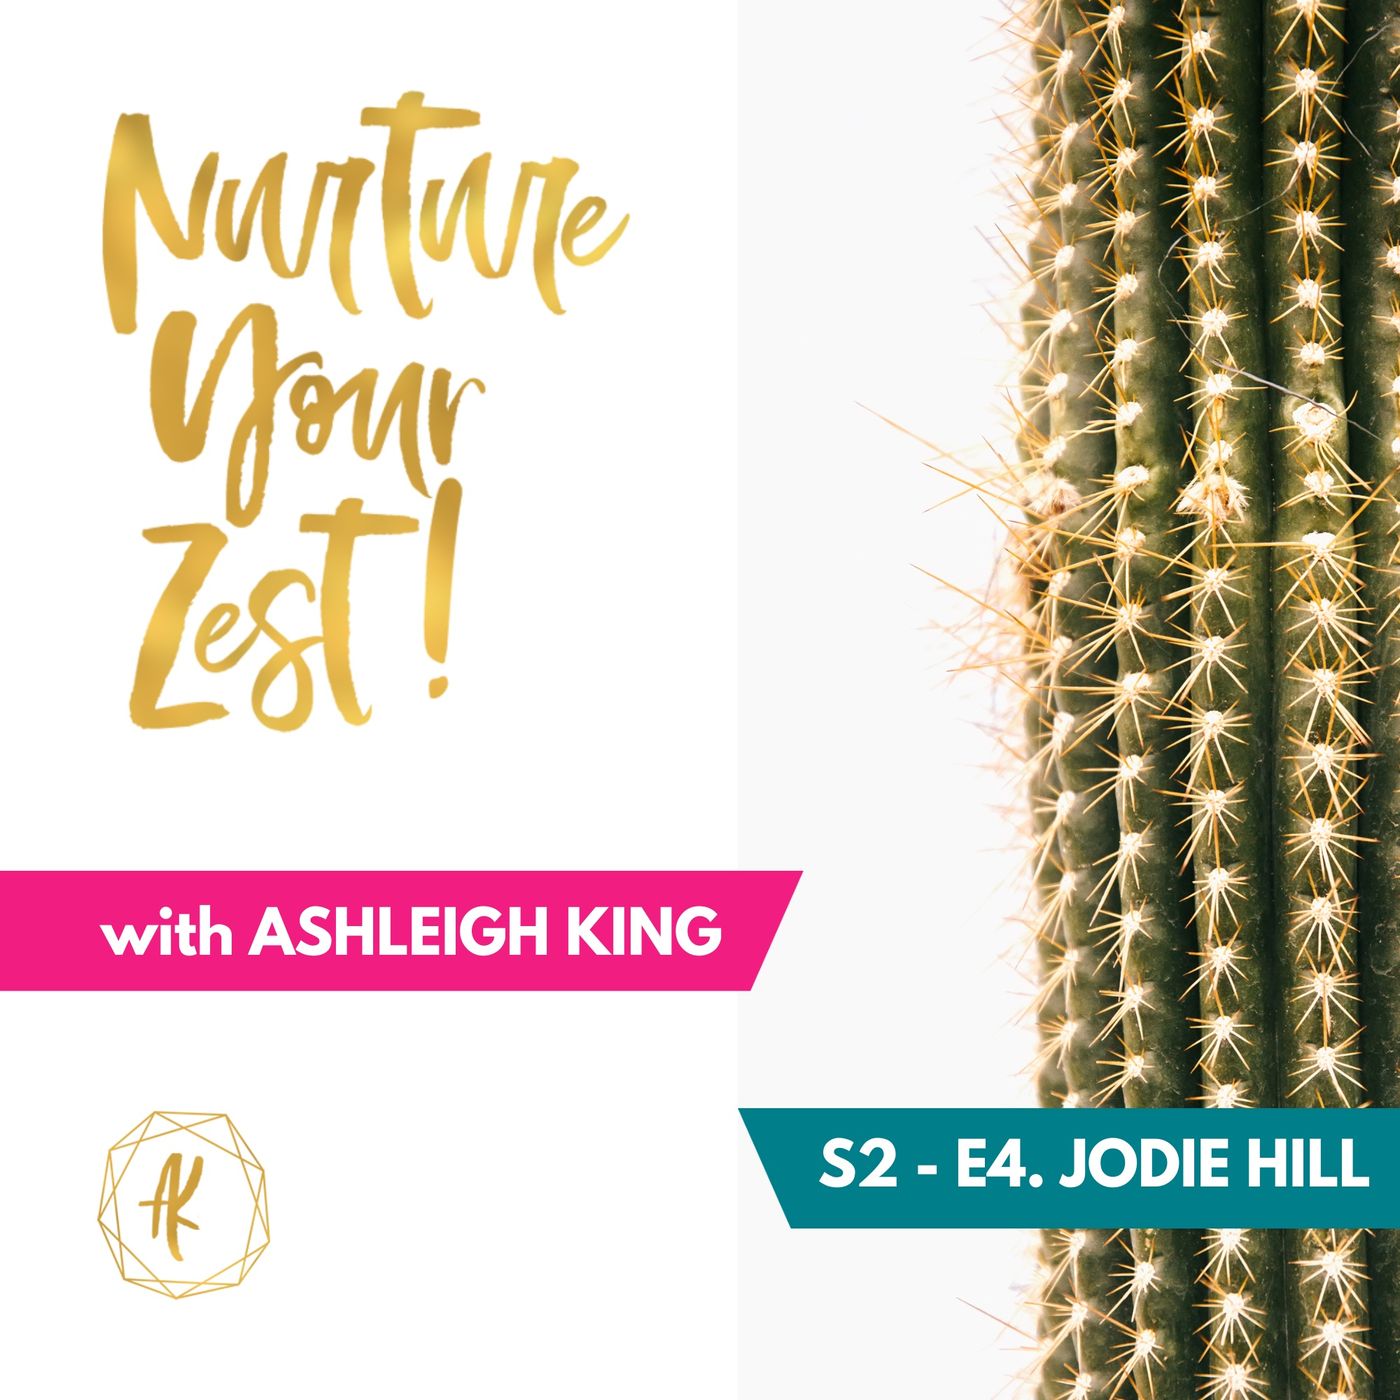 #Nurture Your Zest S2-E4 Jodie Hill on ADHD, PTSD, mental health, leadership tips & sleep with Ashleigh King